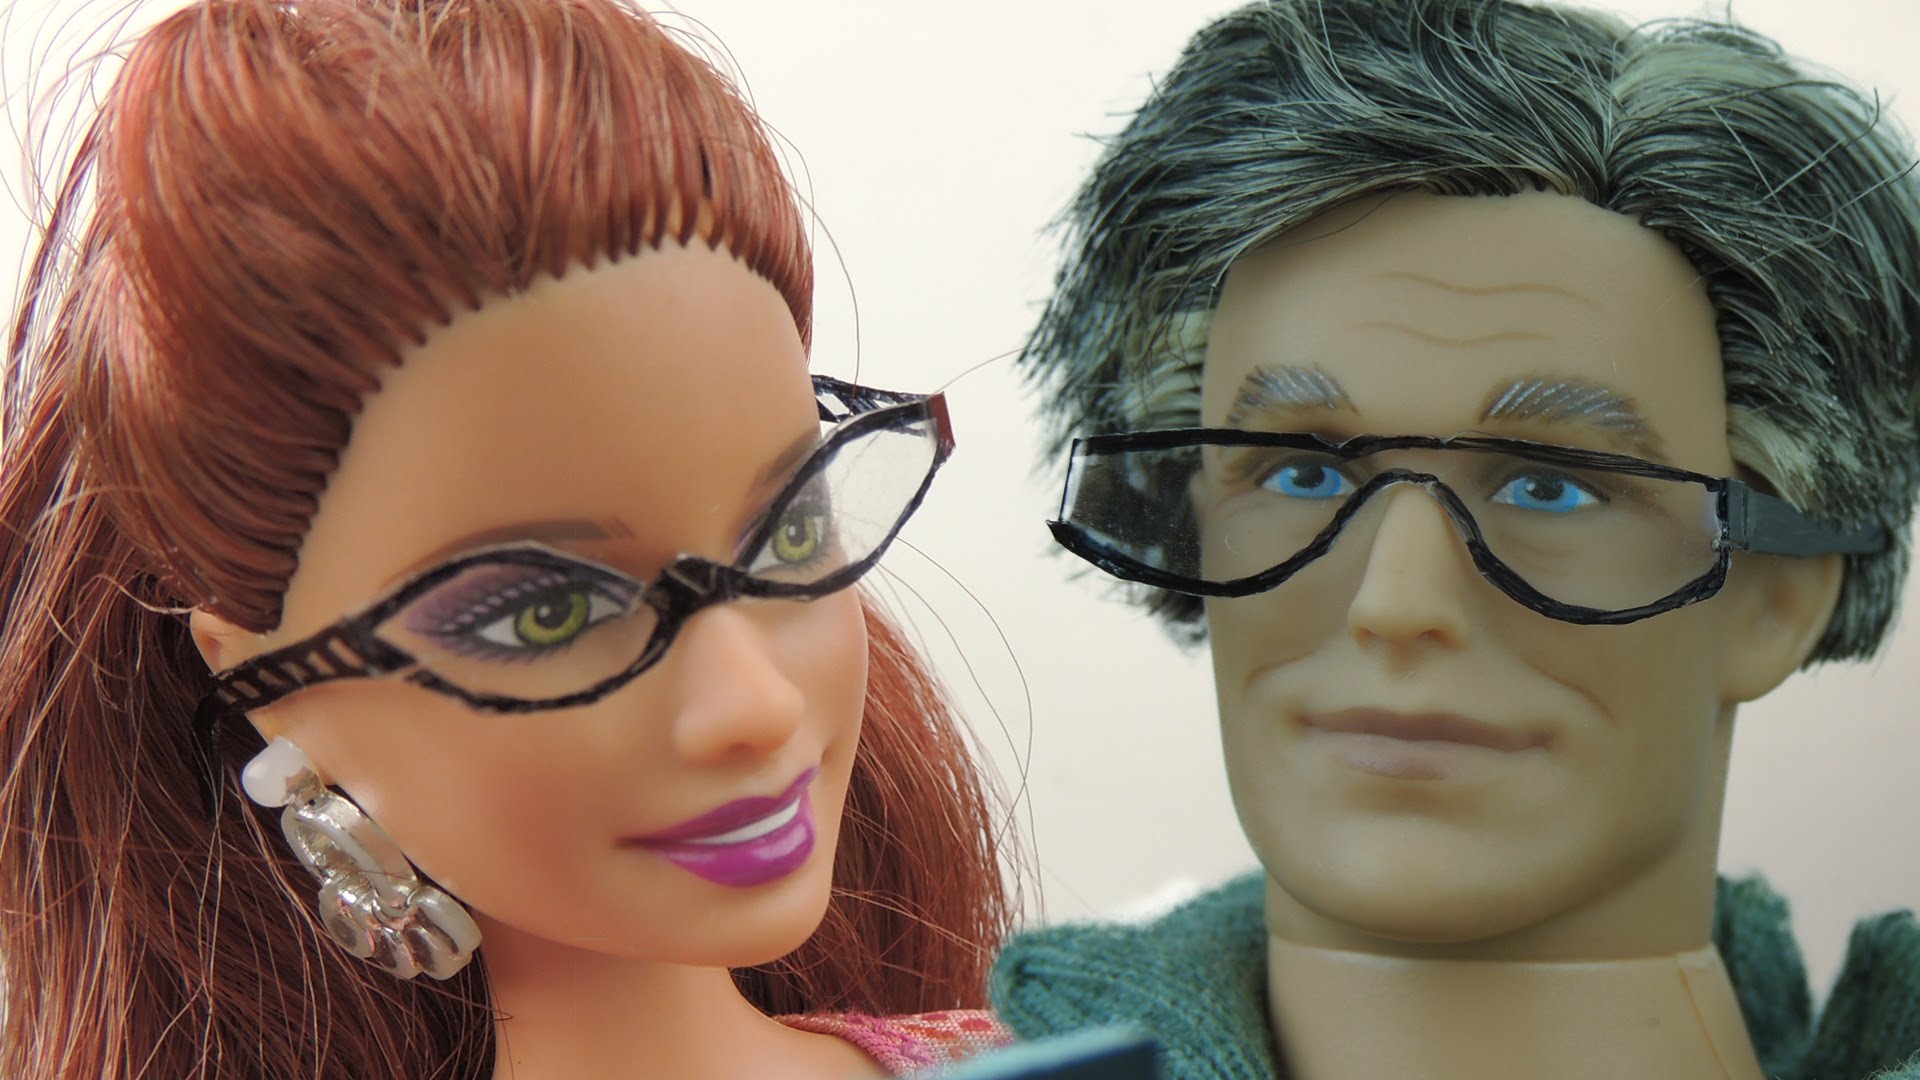 How to make Doll Glasses Tutorial - Really Easy! - YouTube